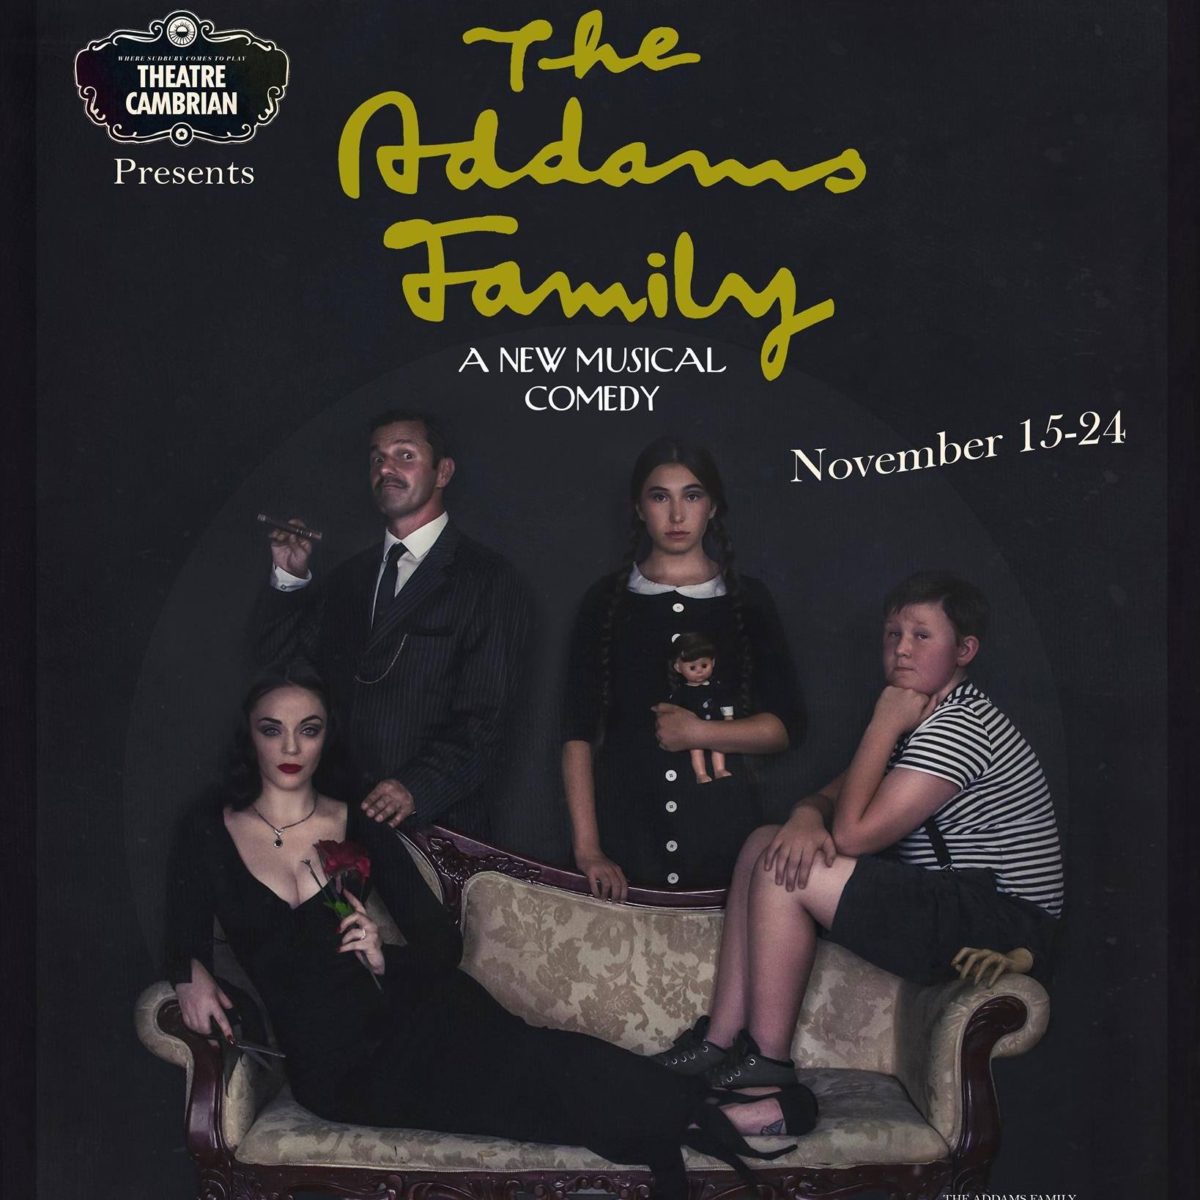 THE ADDAMS FAMILY IS SERVING UP SPOOKS